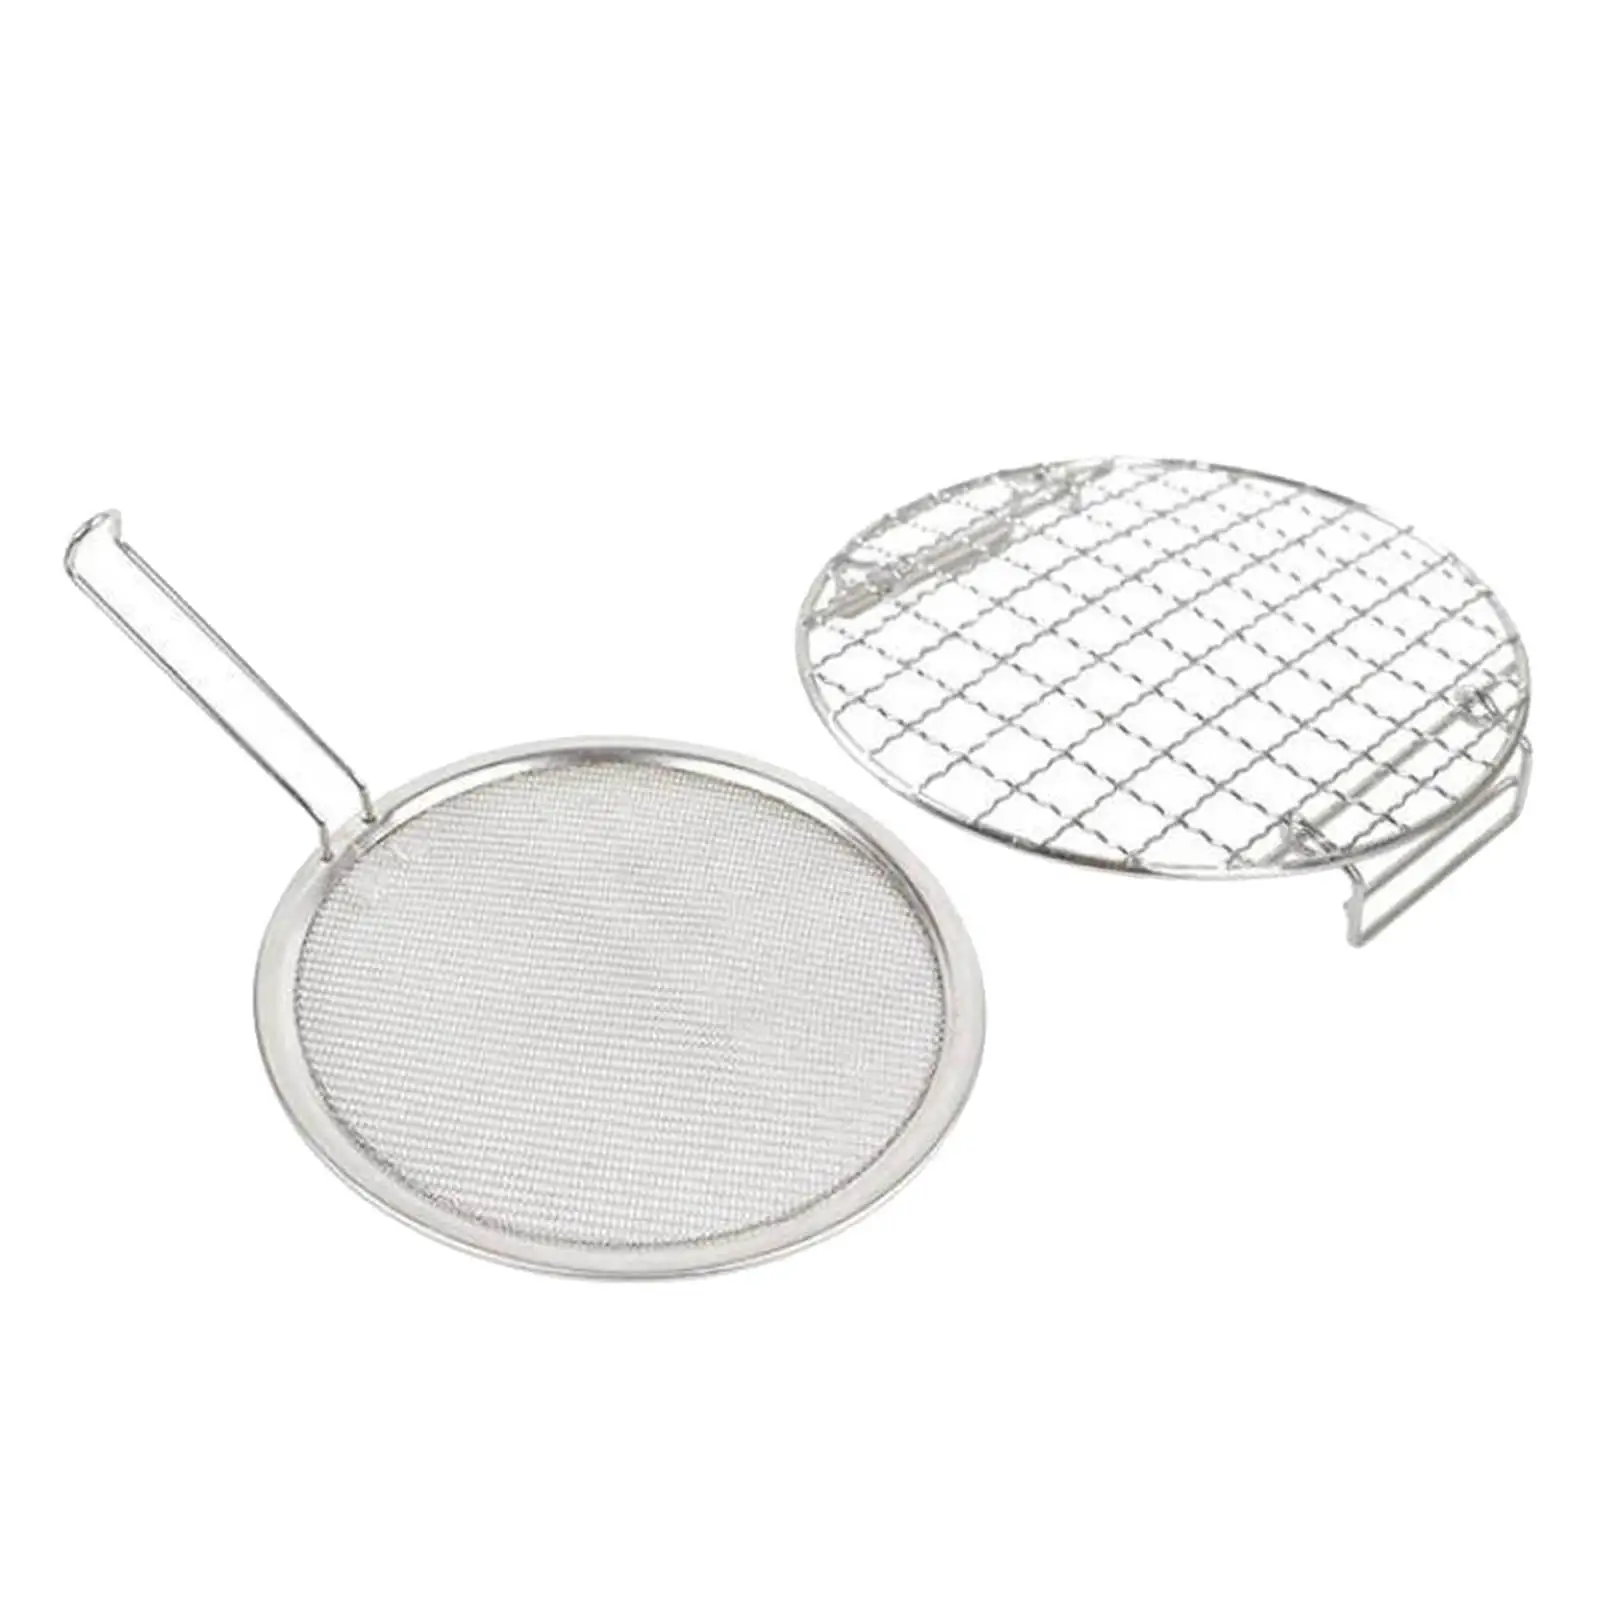 Barbecue Grill Rack Round BBQ Mesh Grill Net Camping Grill for Hiking Travel